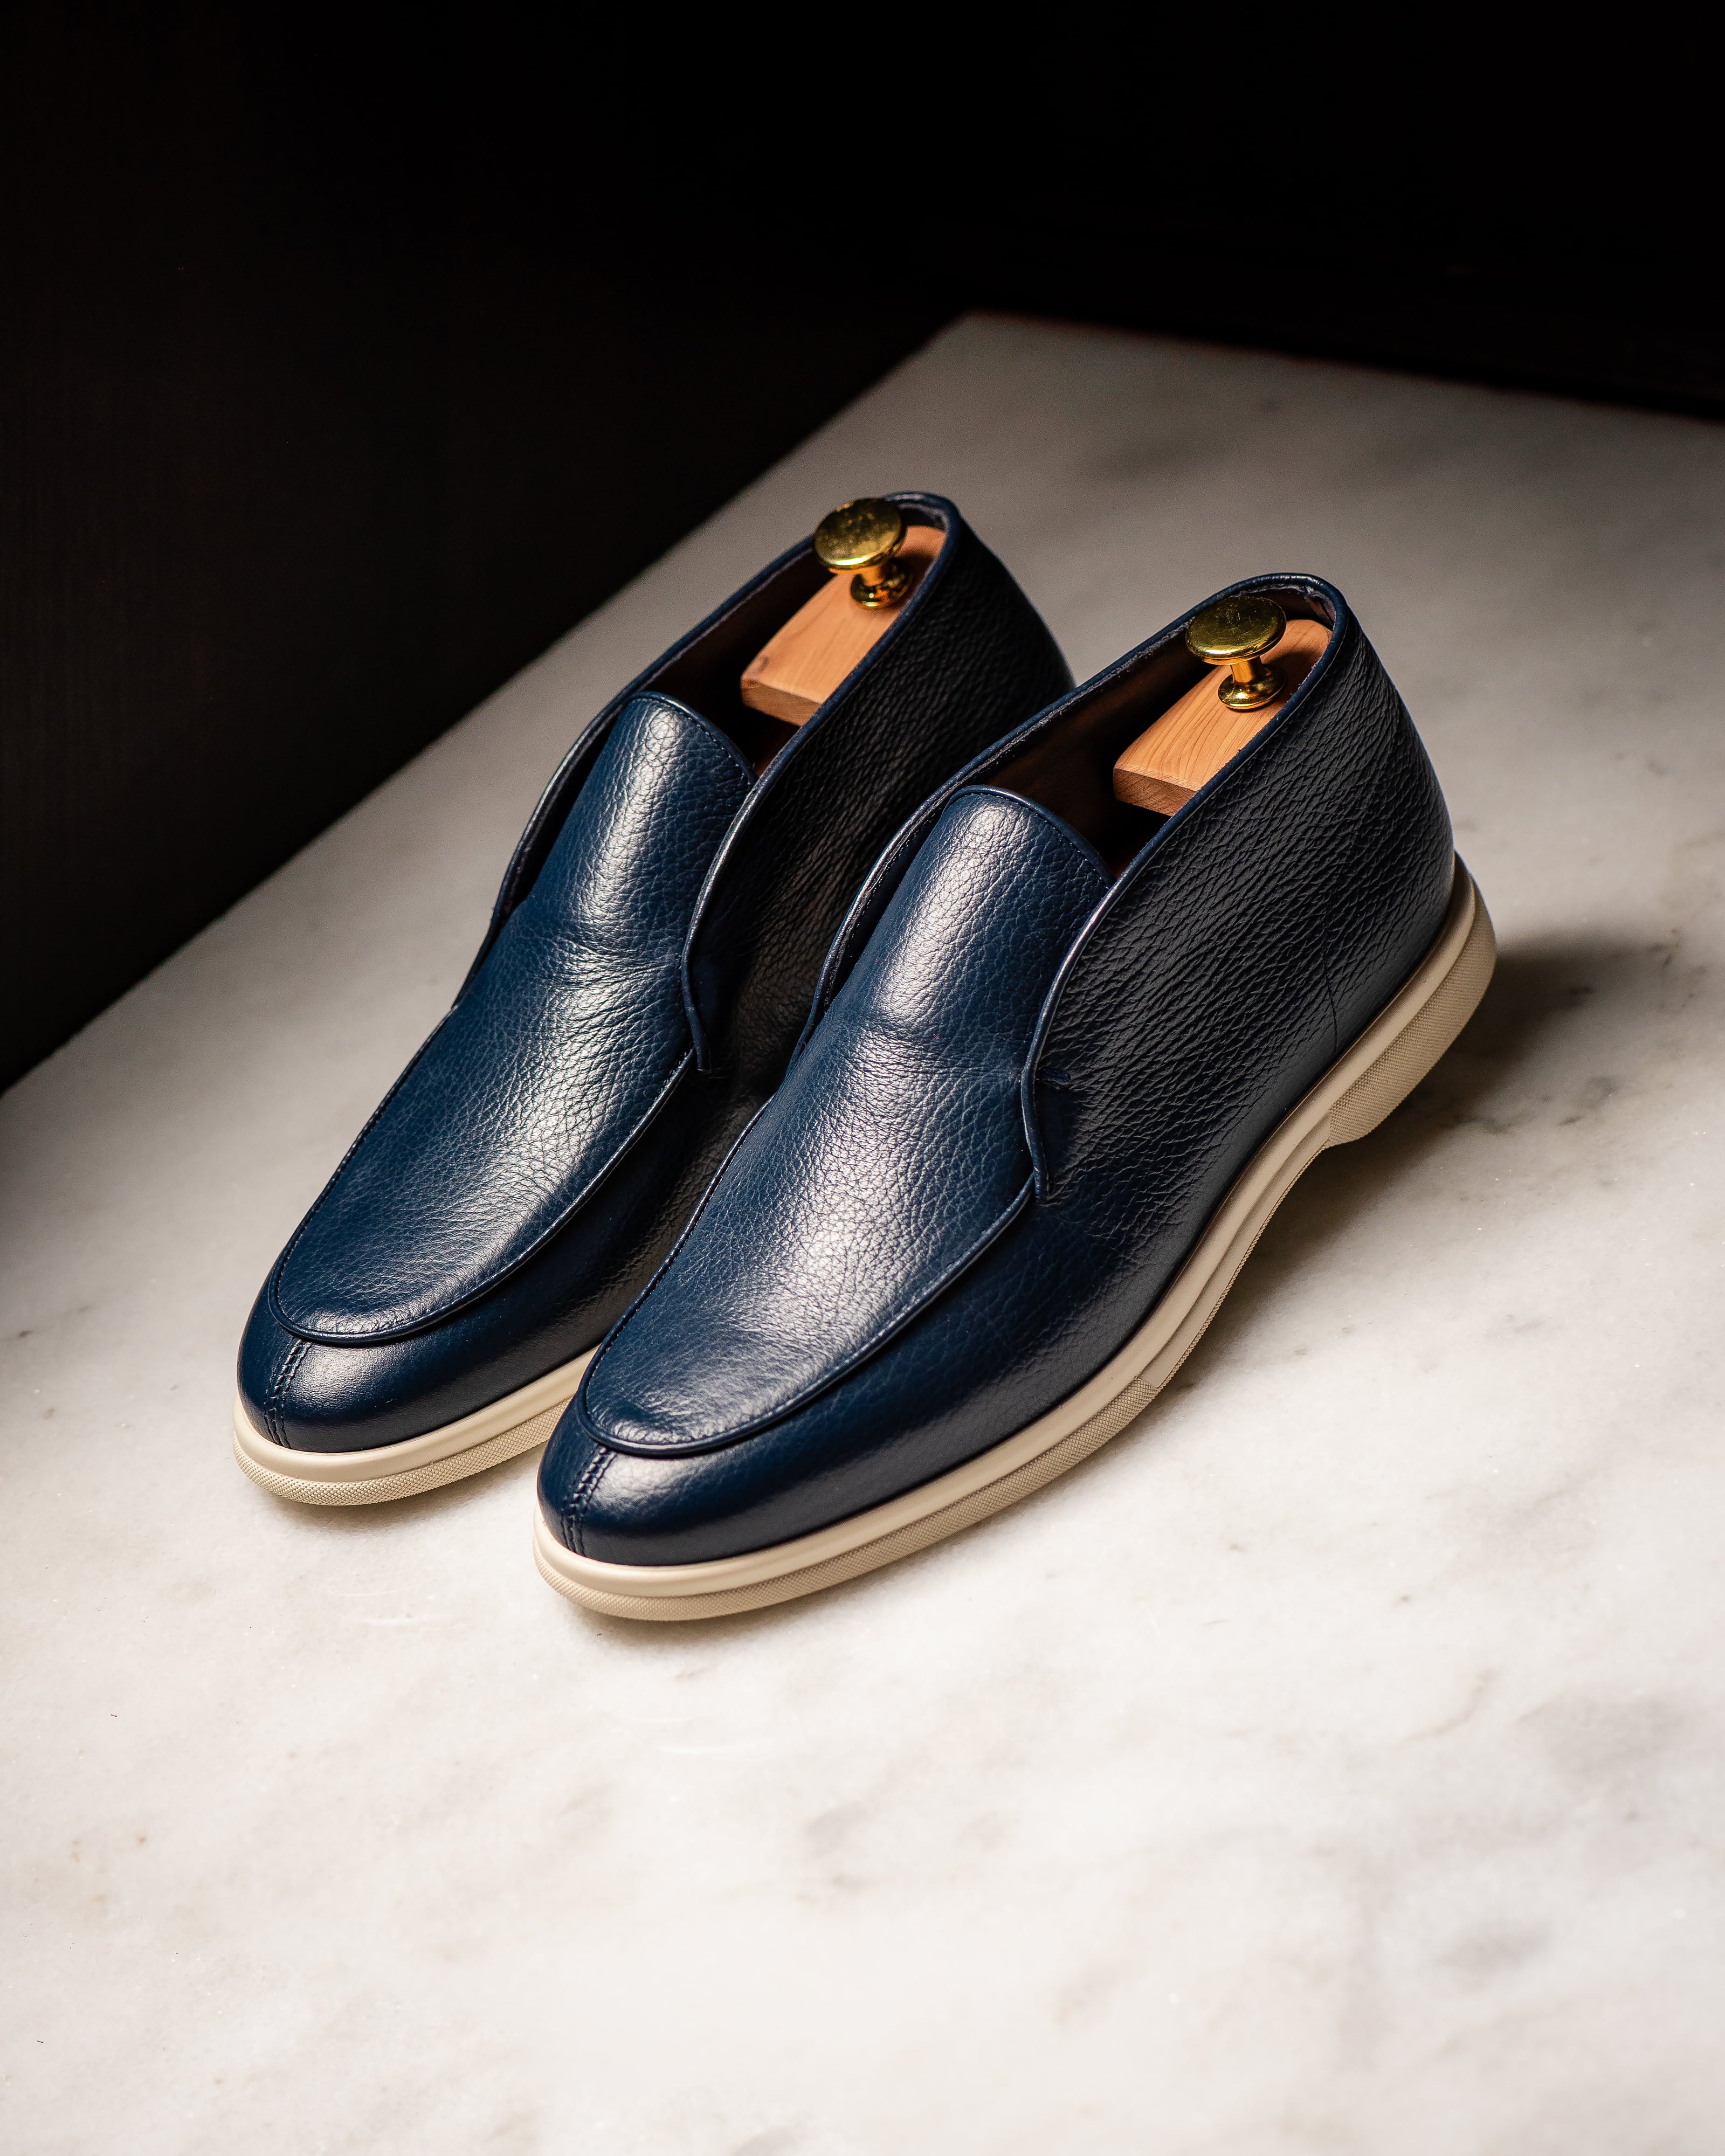 City Loafers - Mid Top in Grain Leather Navy Blue